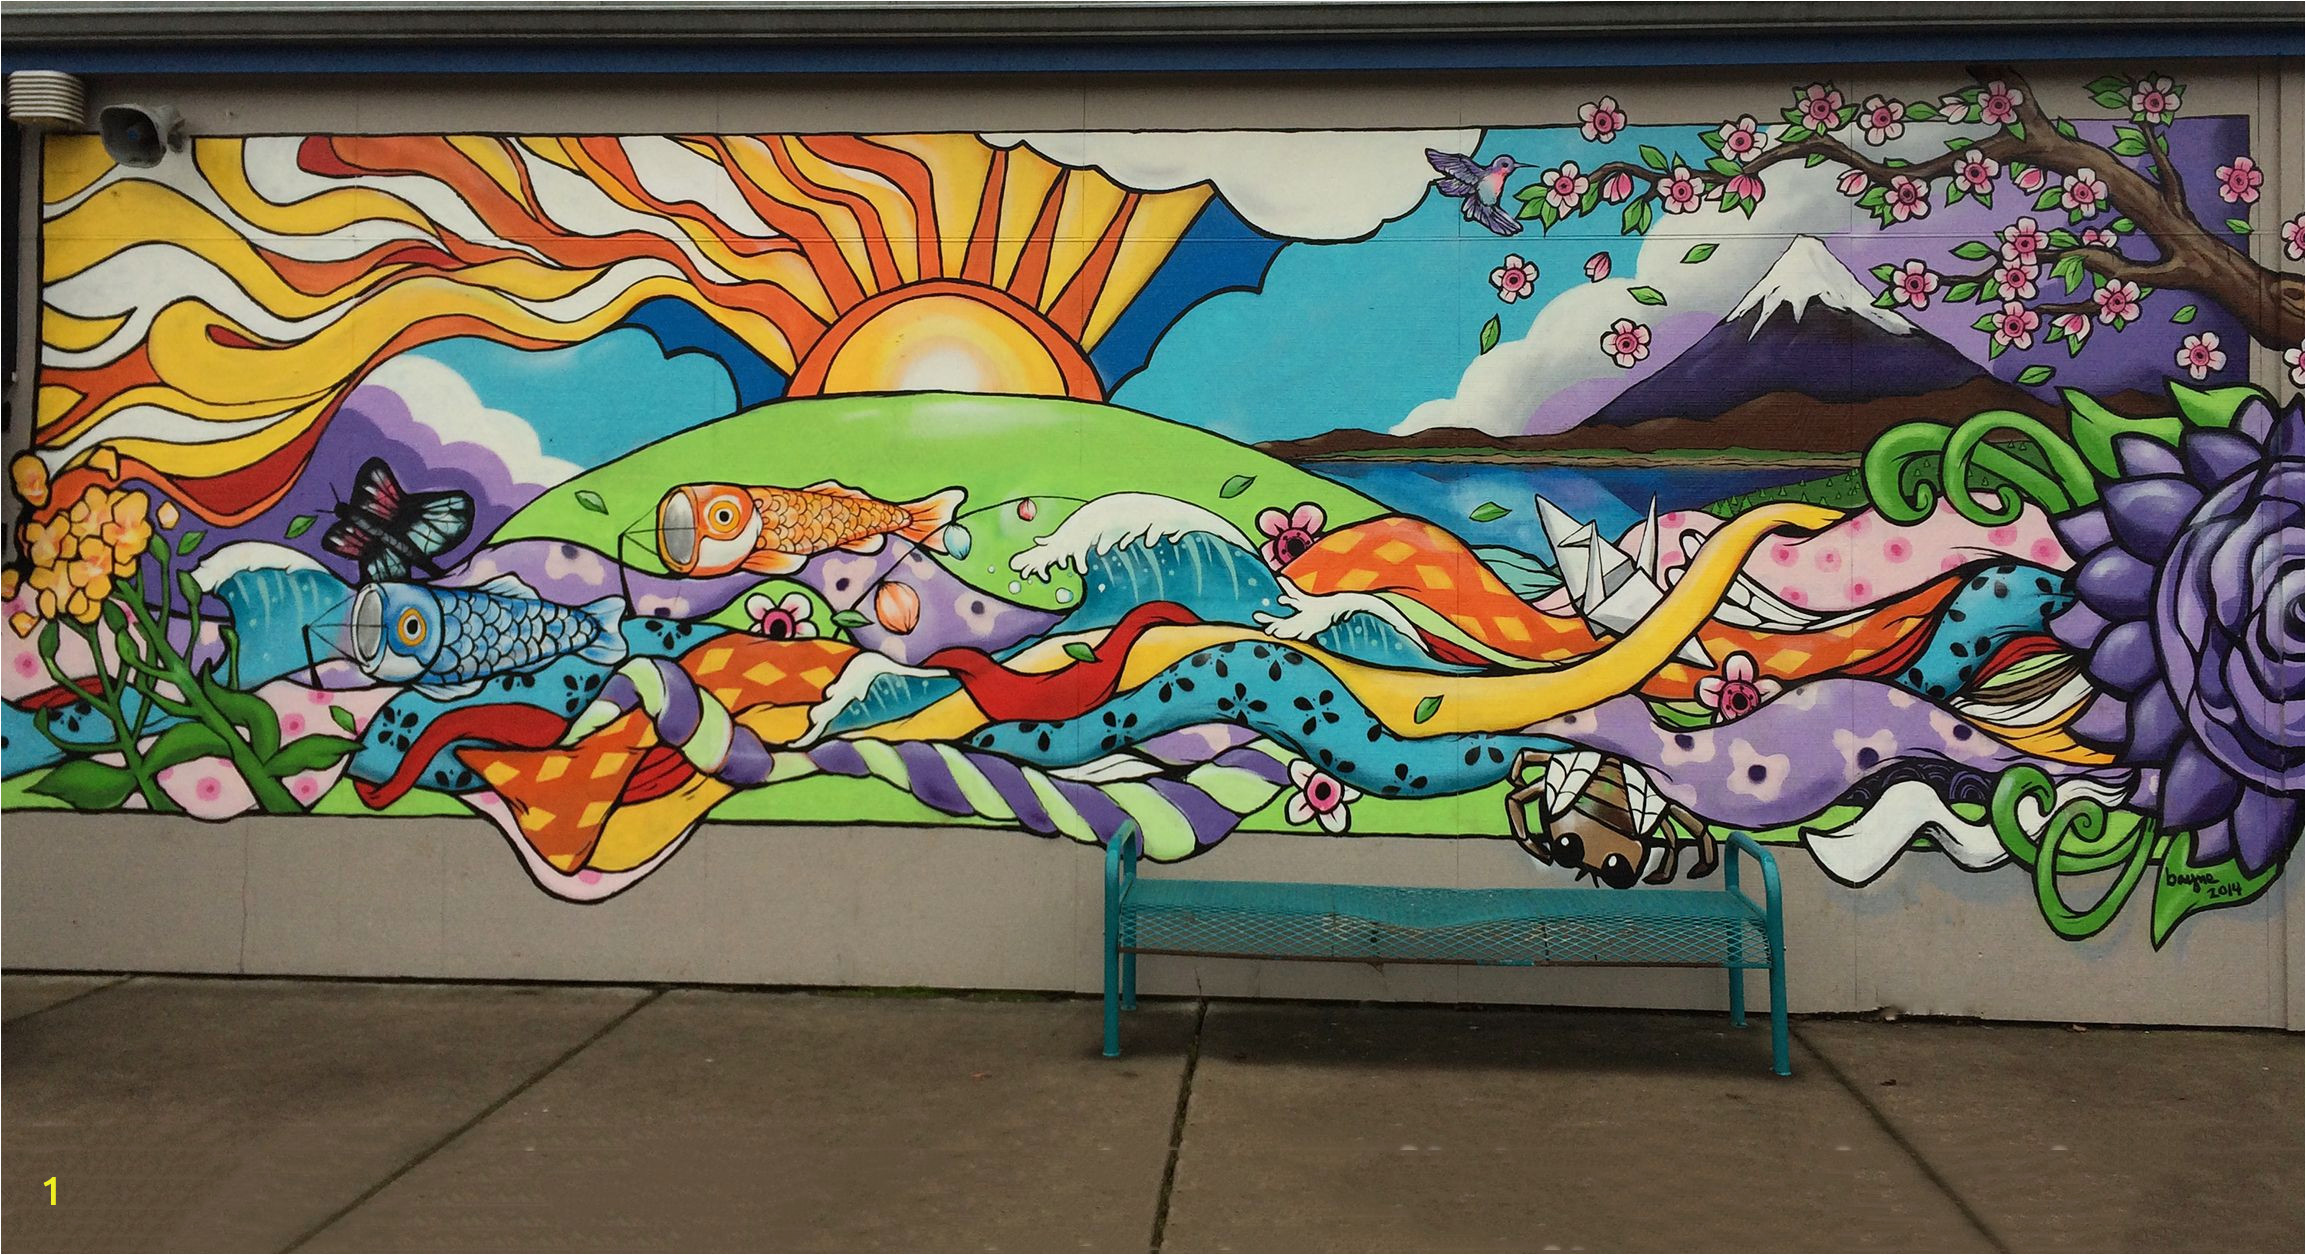 A Building Has A Mural Painted On An Outside Wall Elementary School Mural Google Search